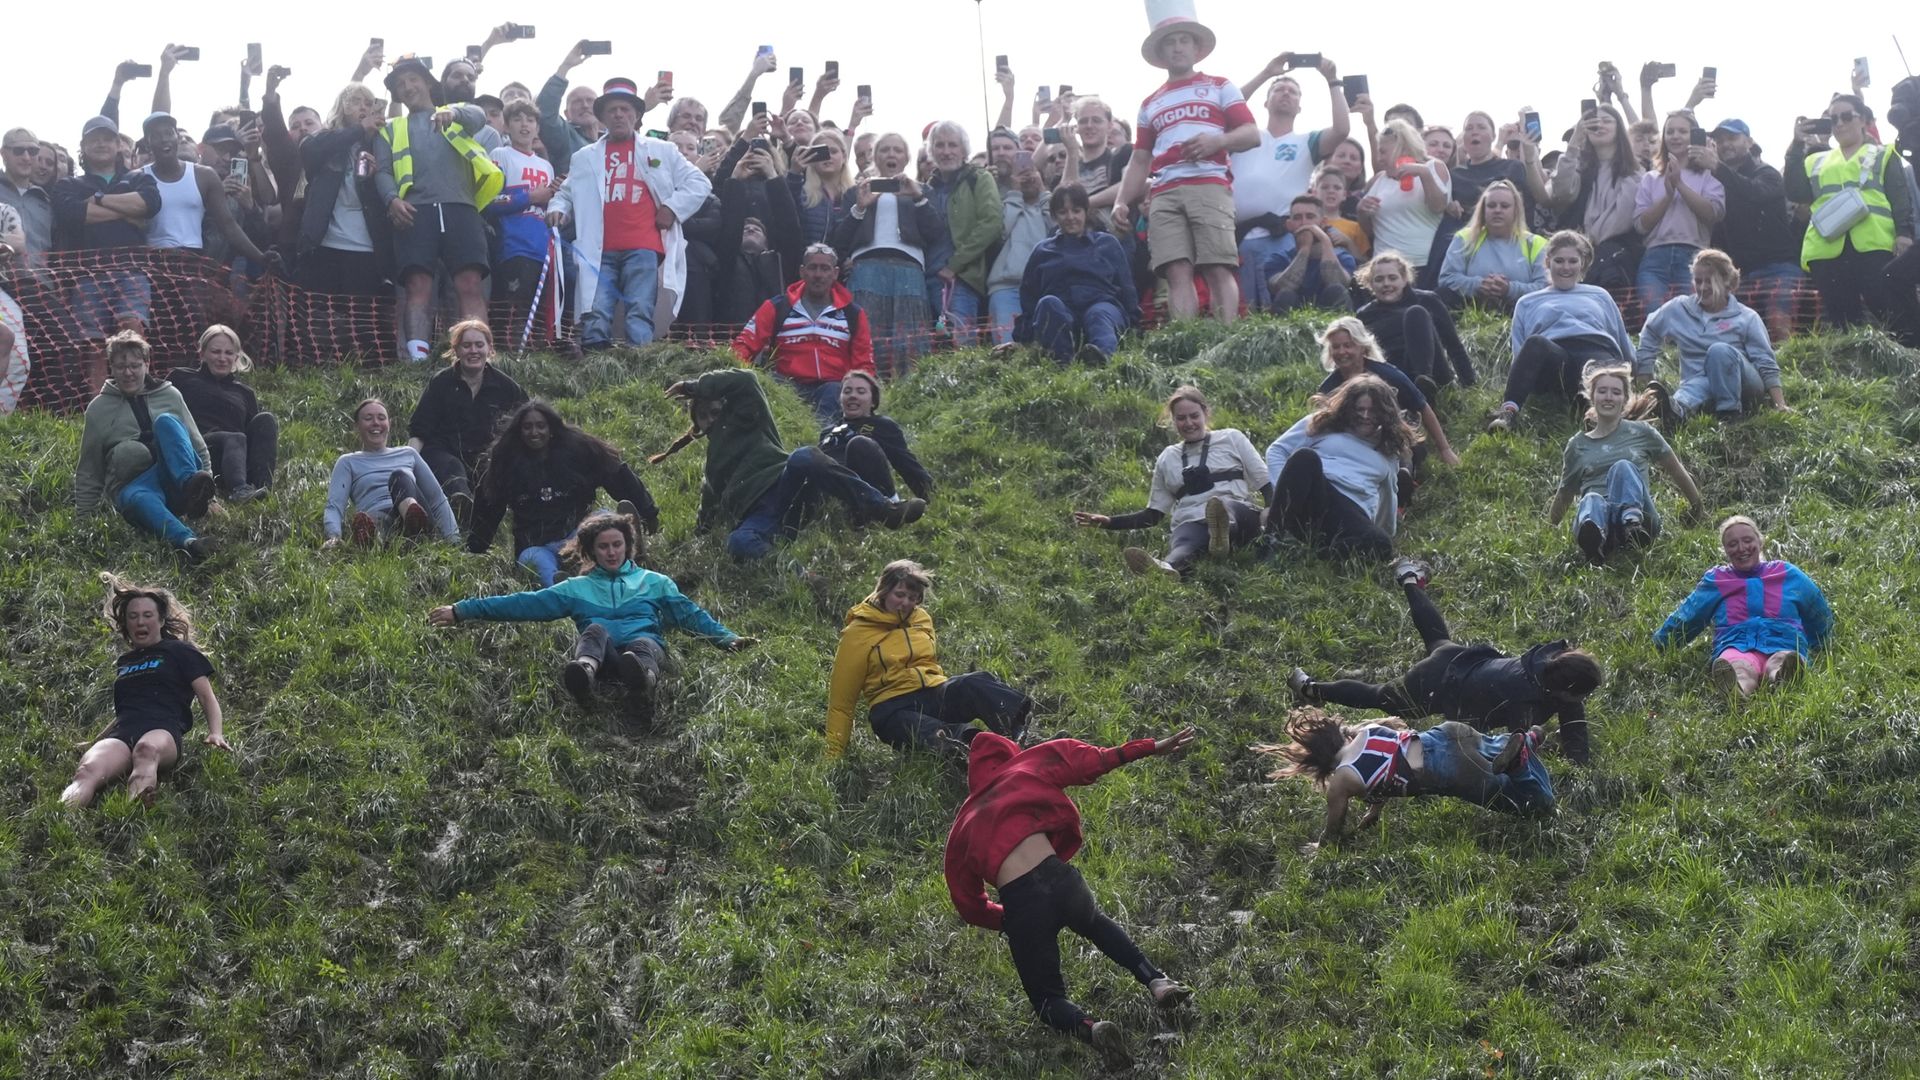 Dairy-loving daredevils descend on Gloucestershire for annual cheese-rolling race